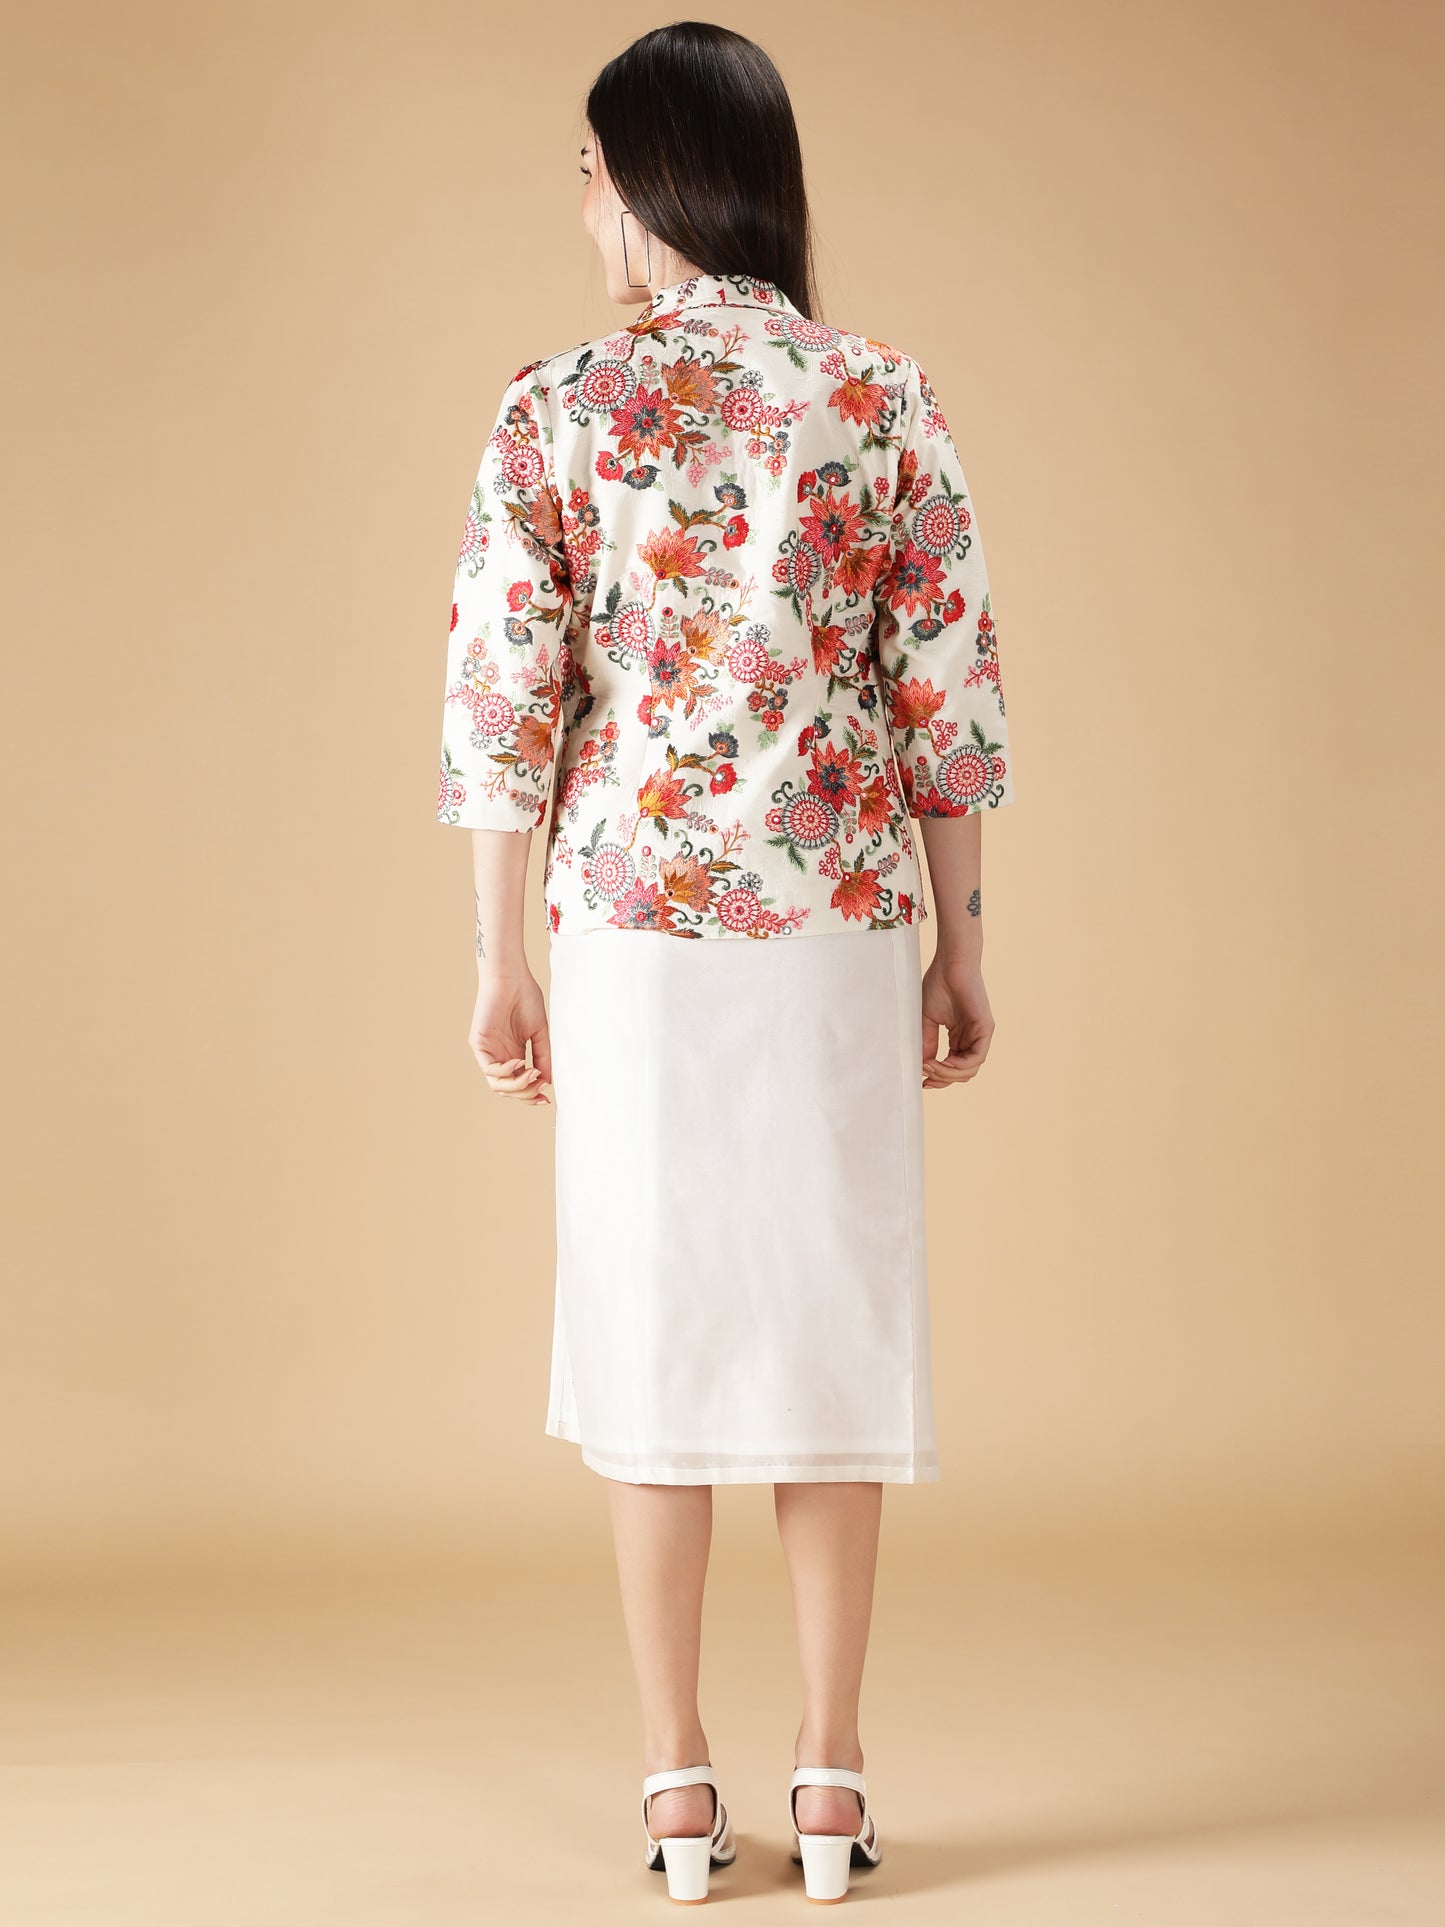 Floral Embroidered Jacket & Top with Skirt (Set of 3)